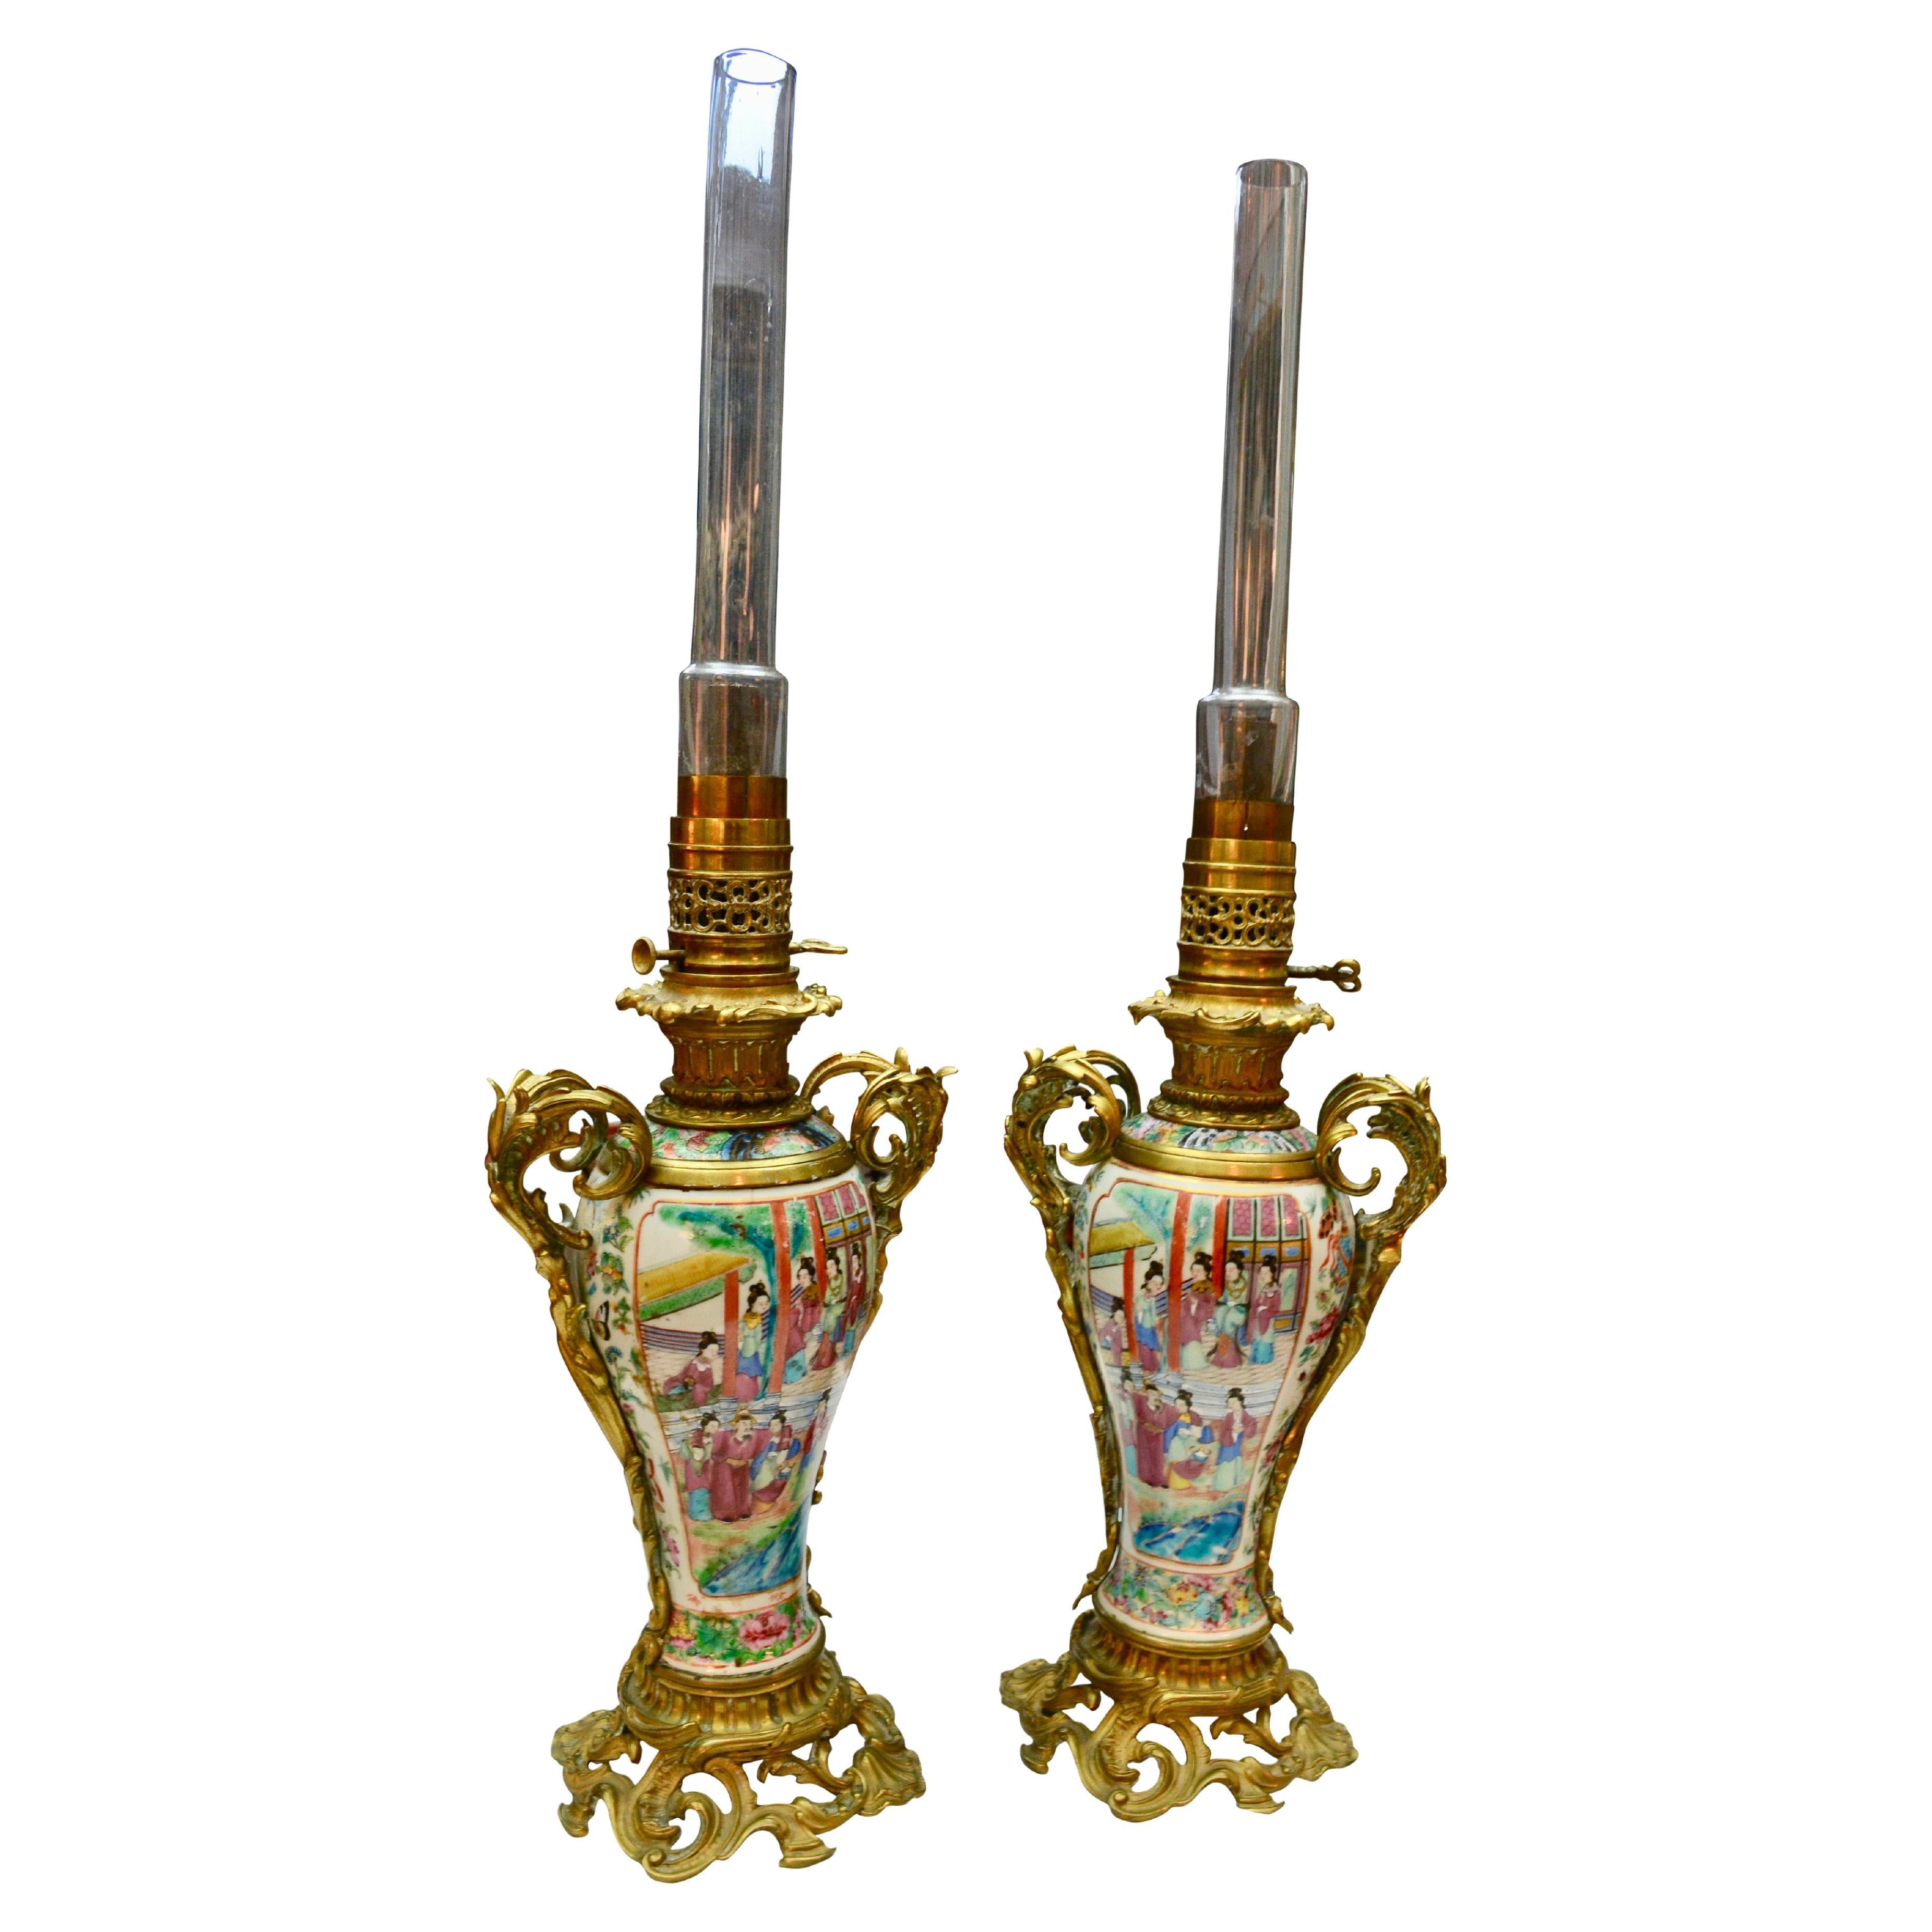 Rare Pair of  Famille Rose Porcelain and Ormolu Napoleon III Oil Lamps